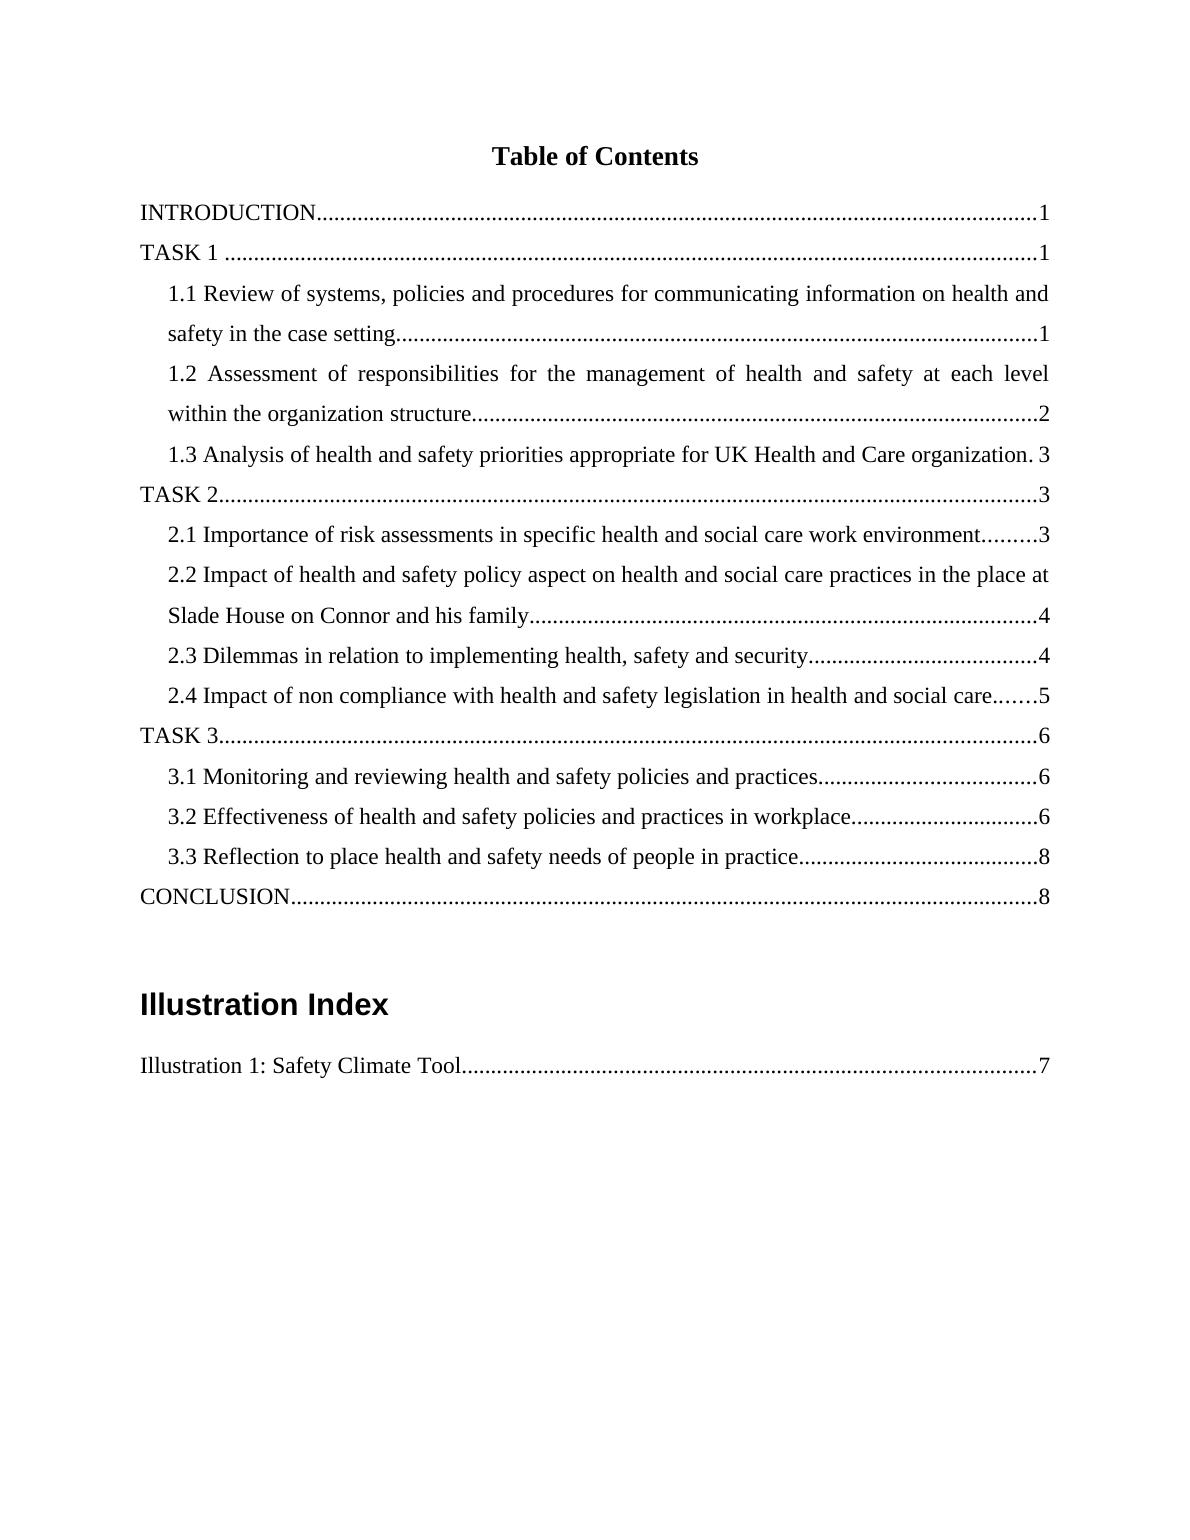 Essay on Health & Safety in the HSC Workplace_2